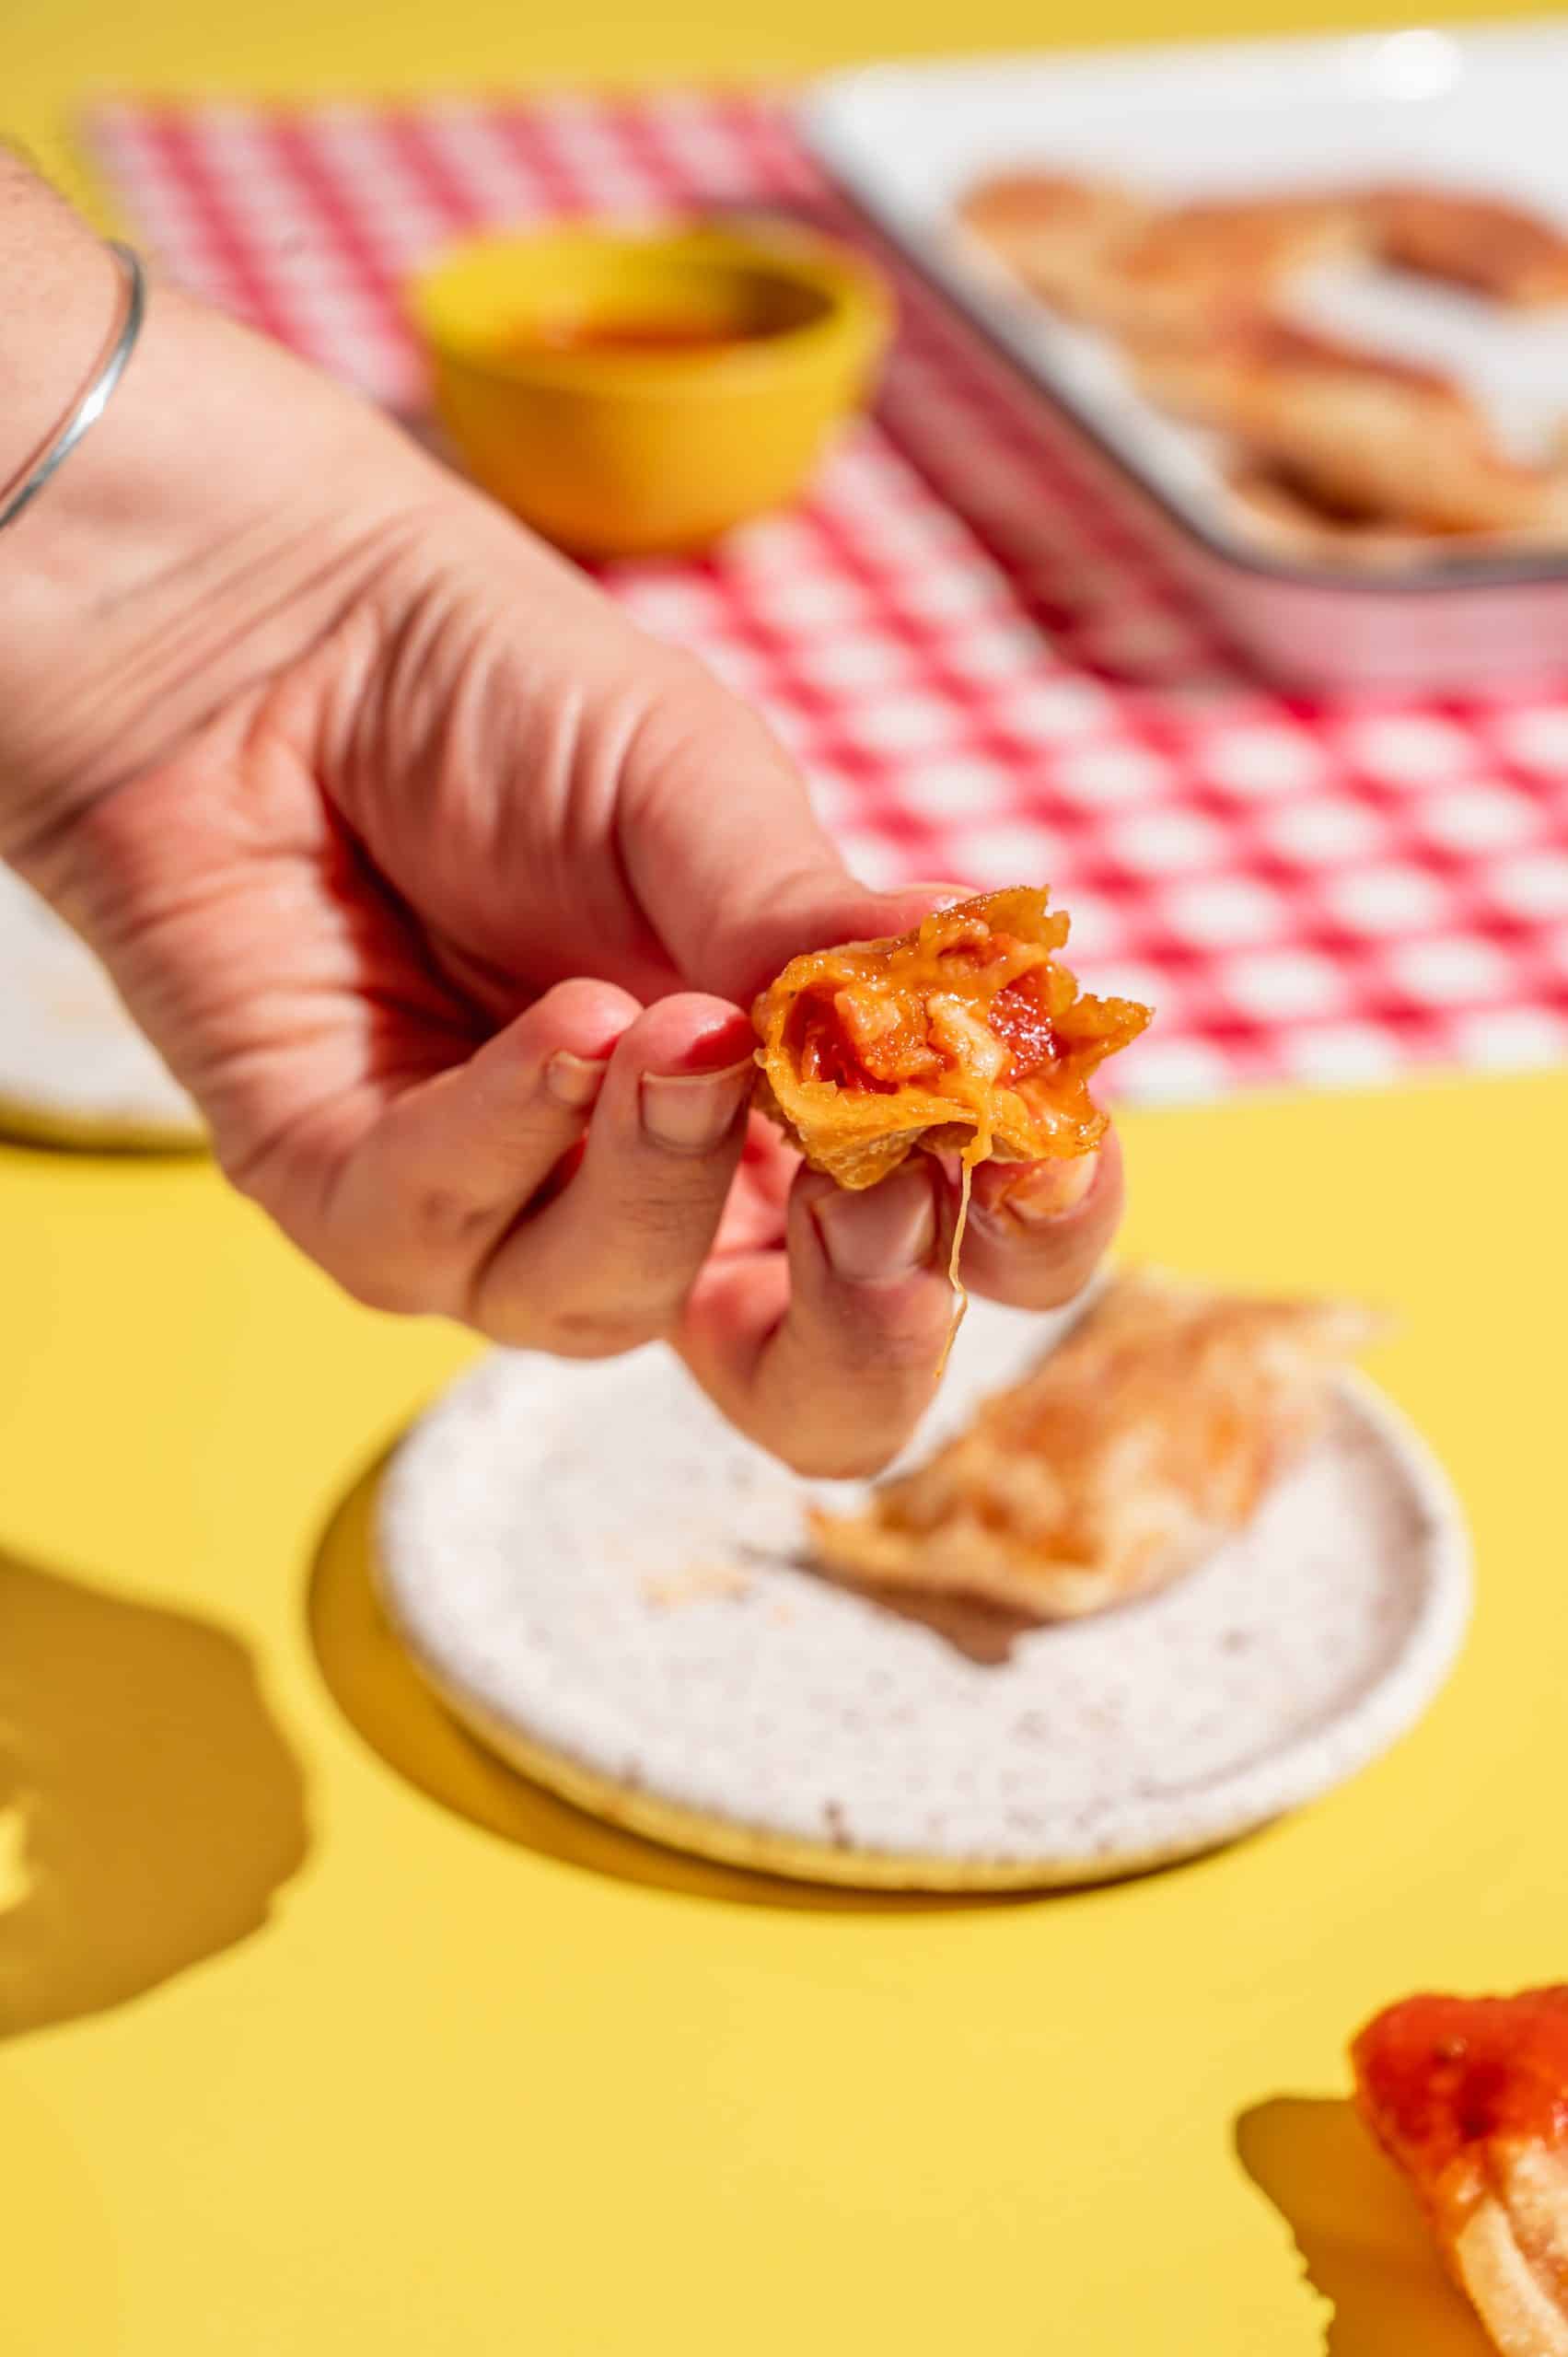 hand holding a homemade pizza roll with a bite taken out, melted cheese filling oozing out